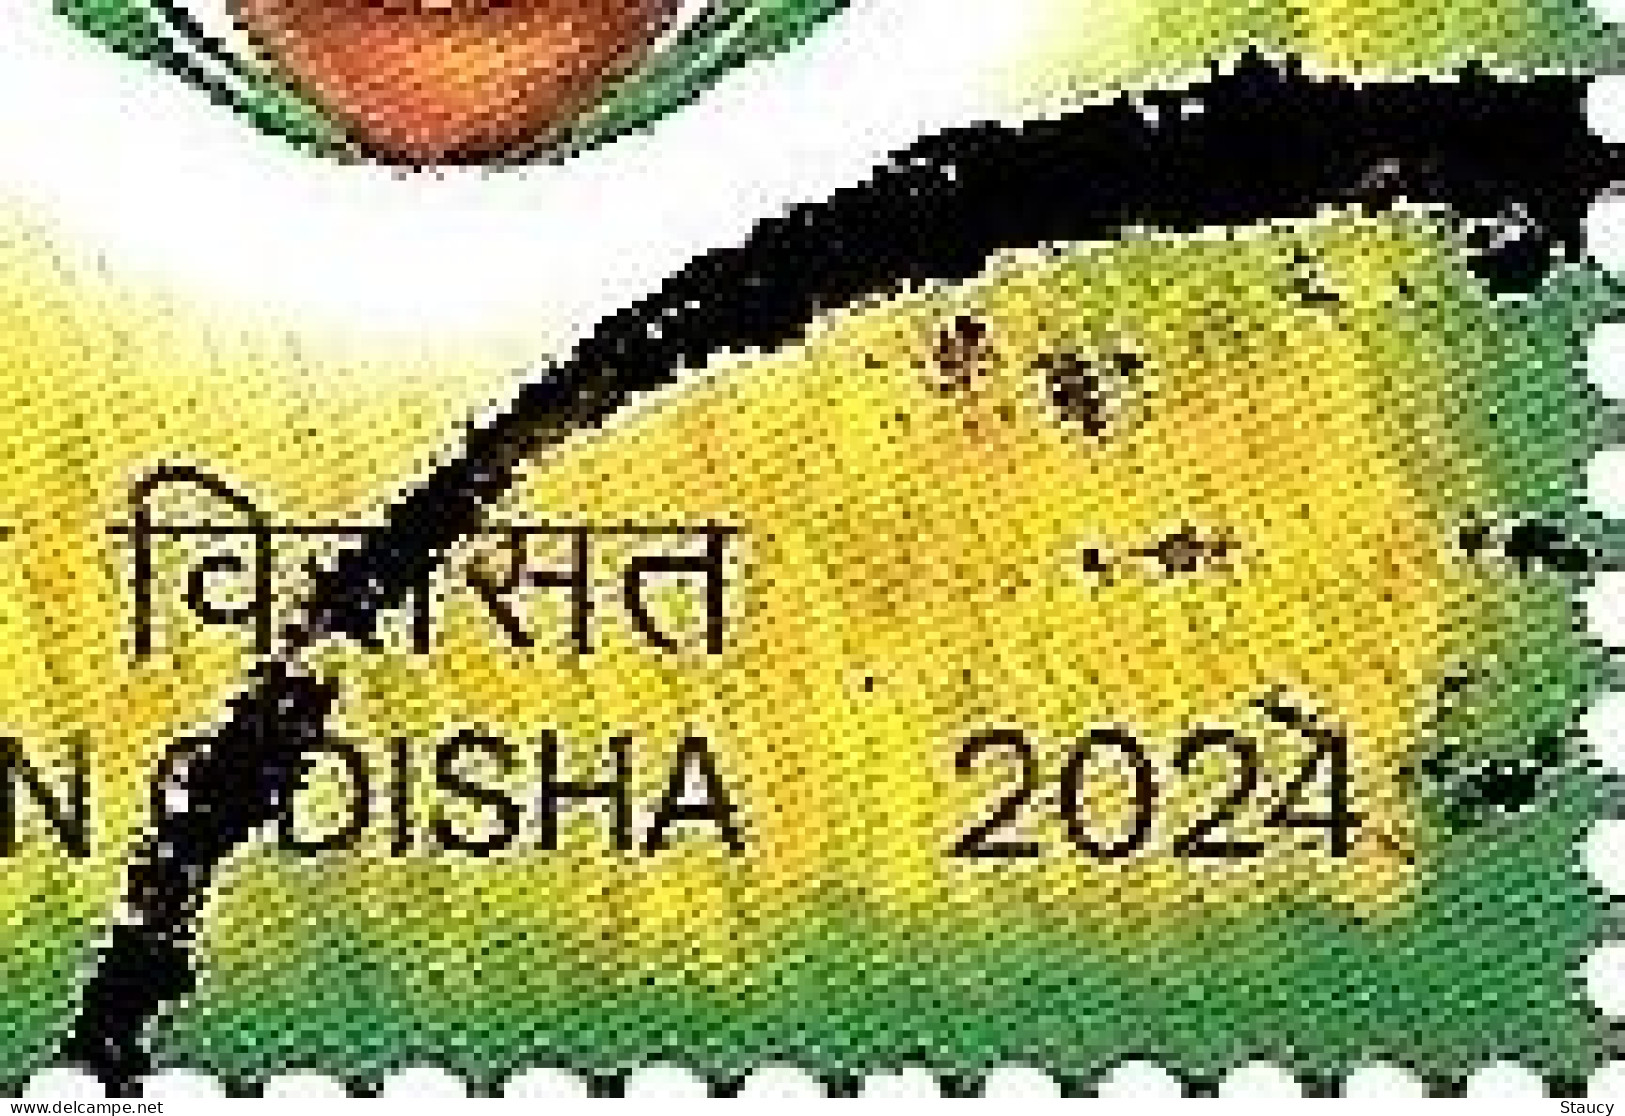 India 2024 CULTURAL HERITAGE OF WESTERN ODISHA 6v Stamp Set Handicraft Etc Used Or First Day Cancelled As Per Scan - Hindouisme